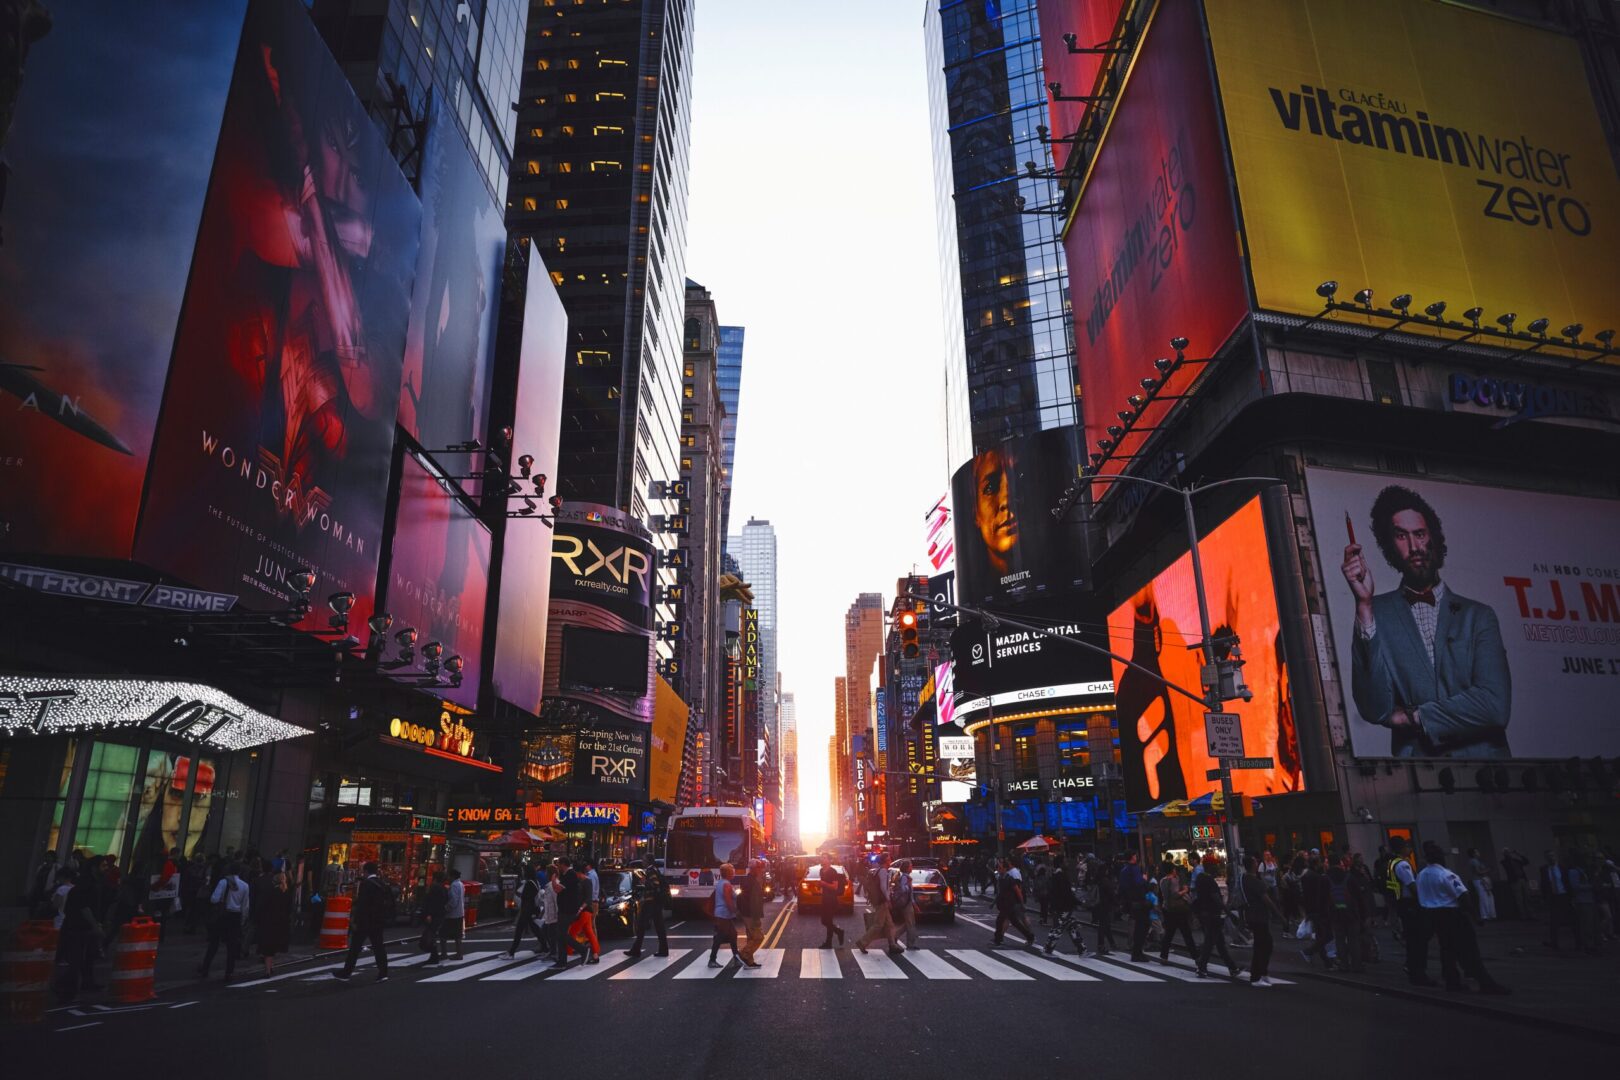 Dusk descends on a bustling times square with vivid billboards and busy streets.